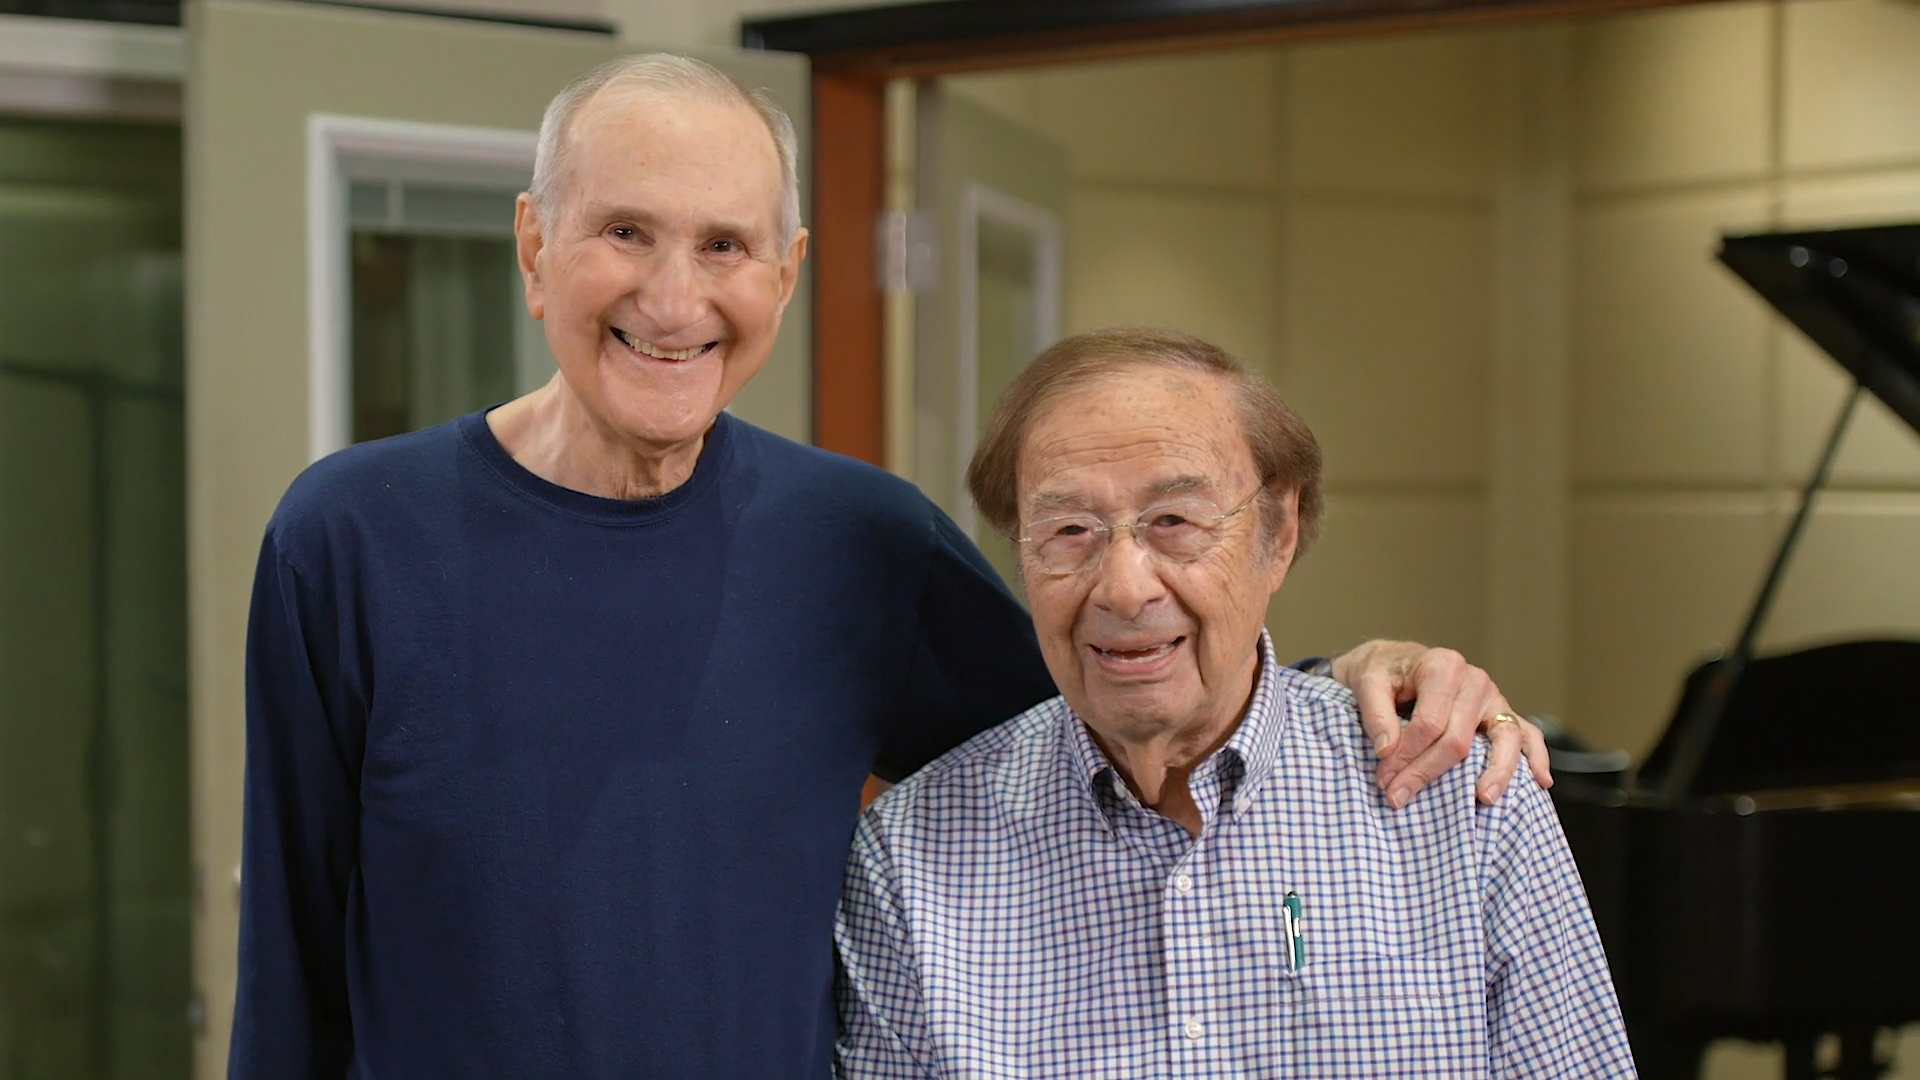 These Men Just Released Their First Music Album At Age 102 And The Washington Post